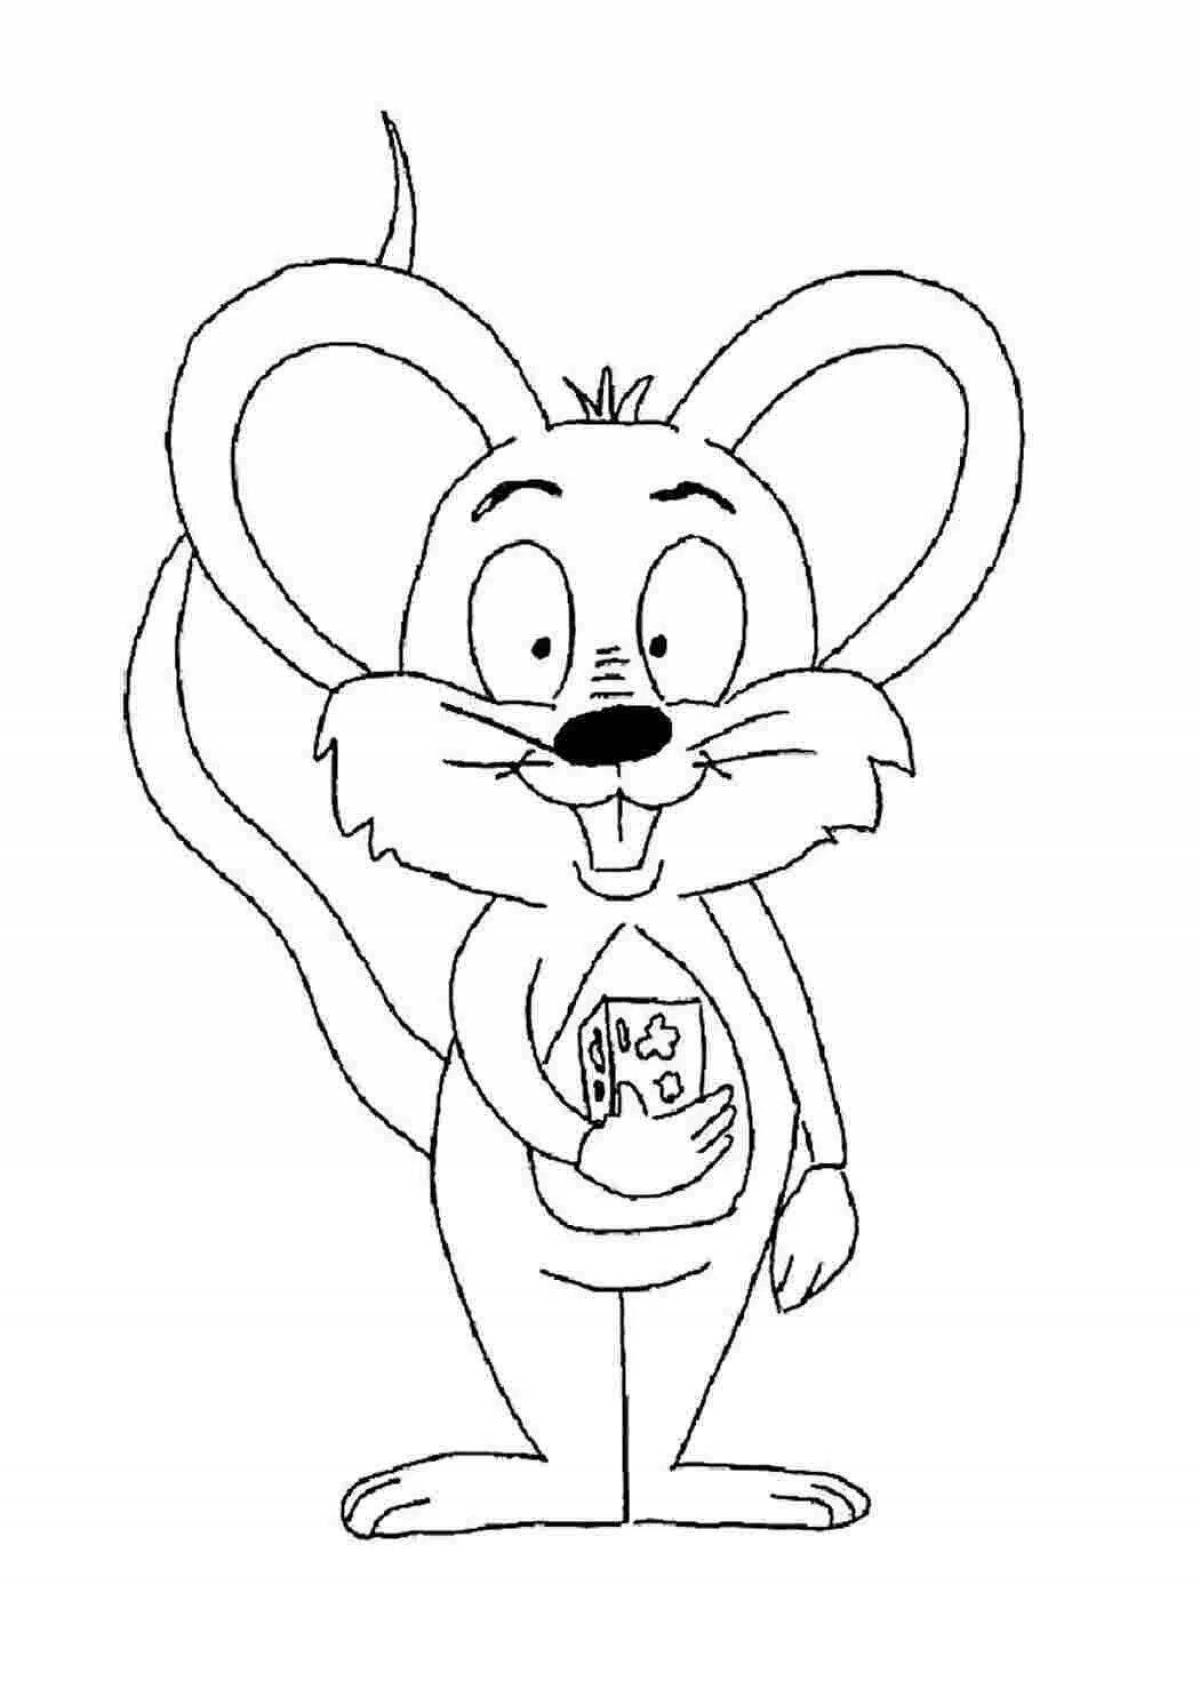 Cute mouse and bear coloring book